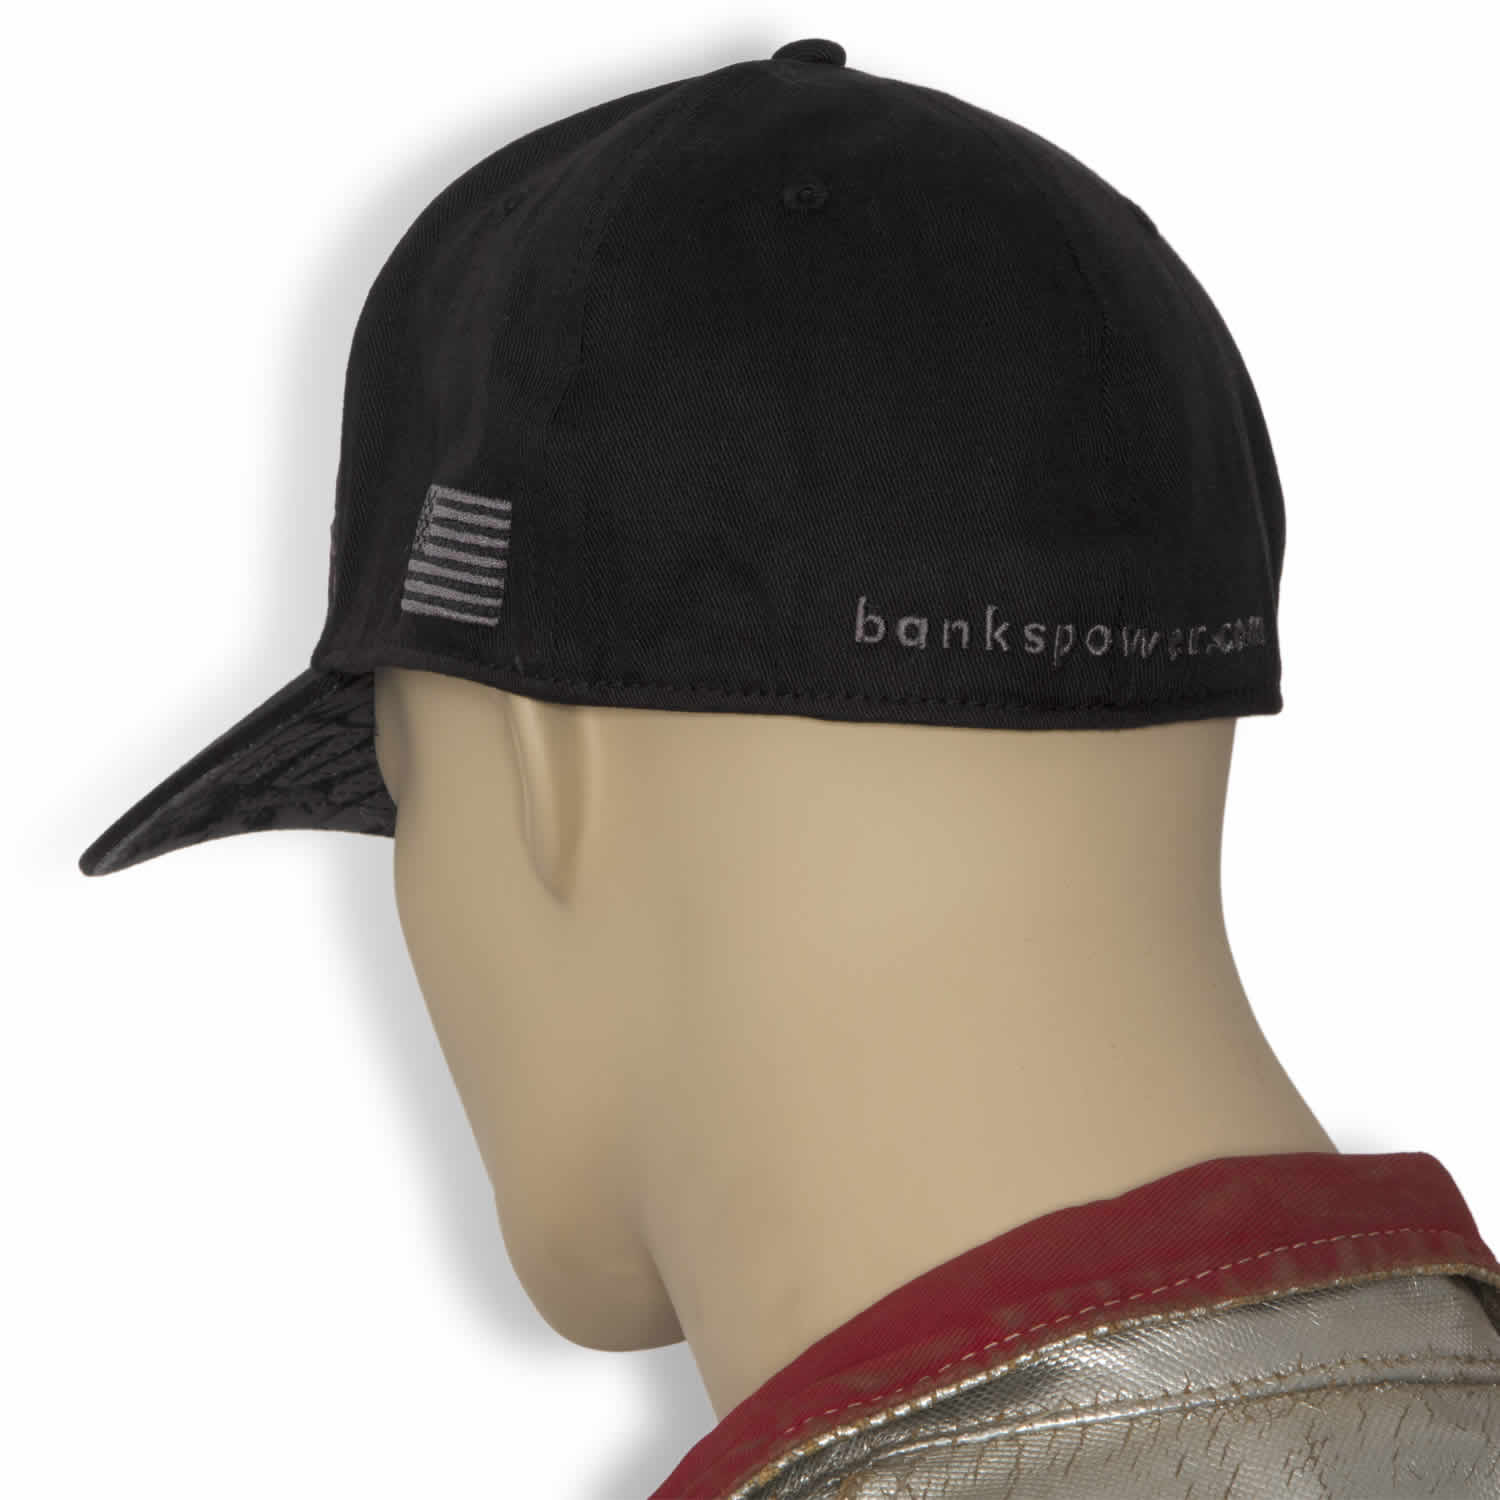 Power Hat Premium Fitted Black/Gray Curved Bill Flexible Fit Banks Power